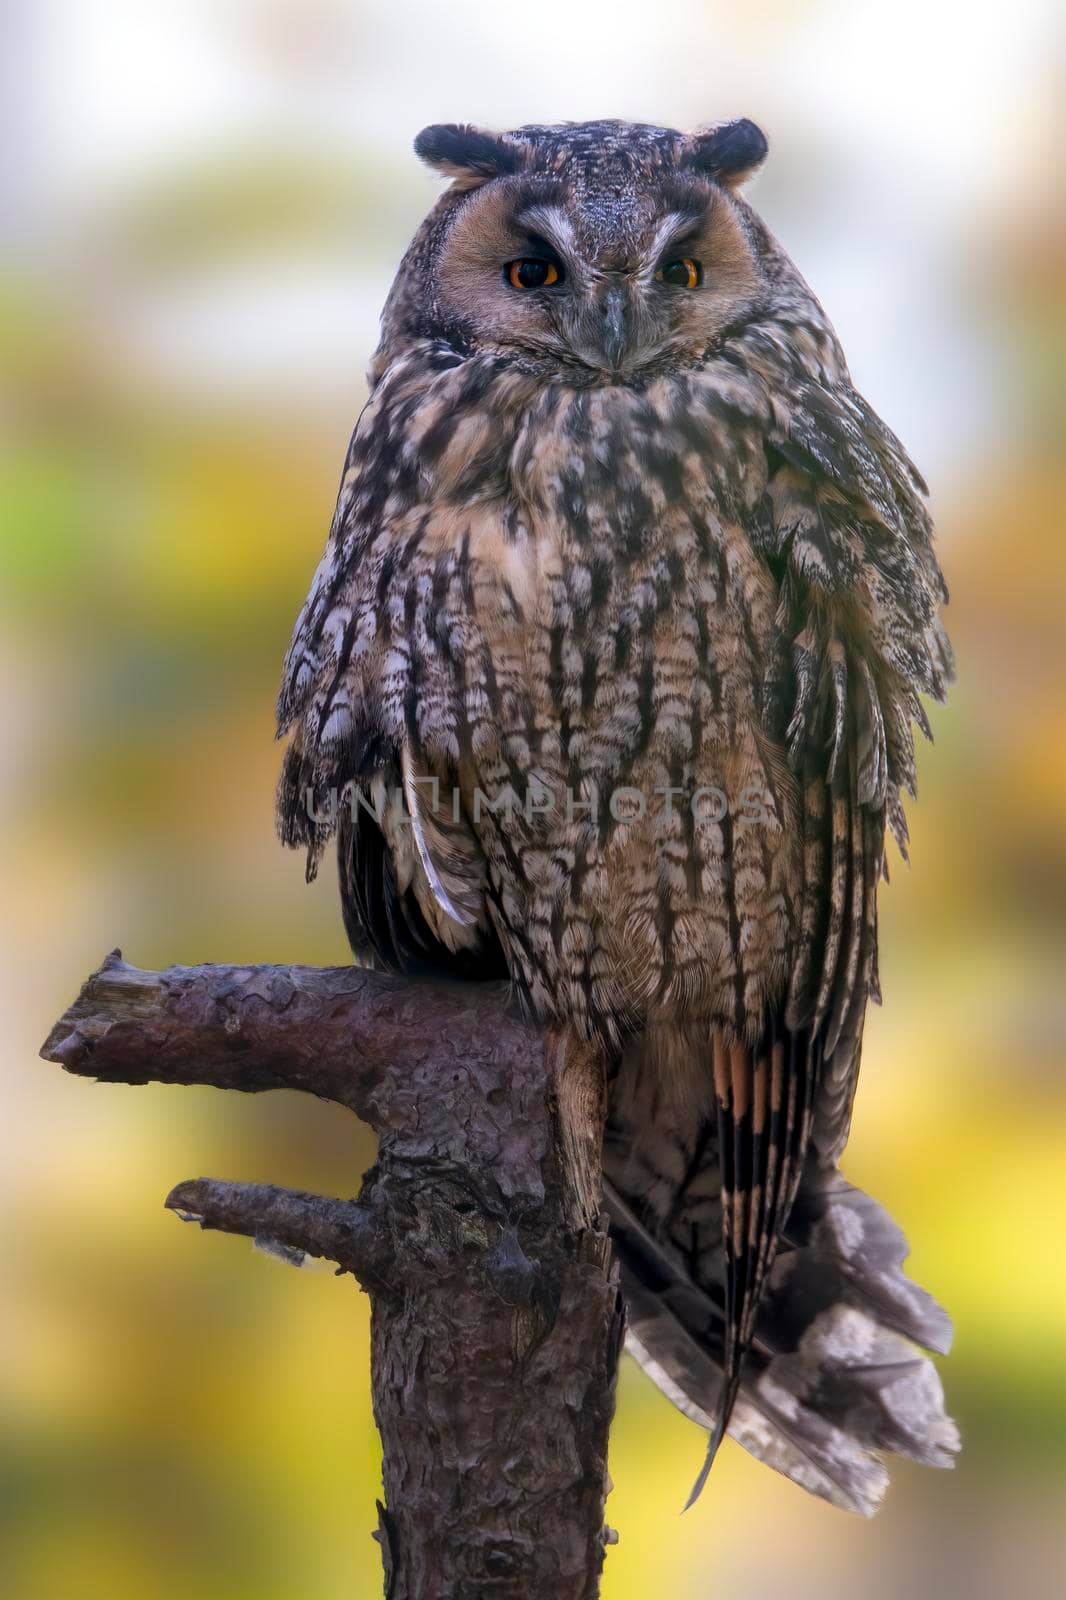 a long-eared owl sits on an old tree trunk by mario_plechaty_photography